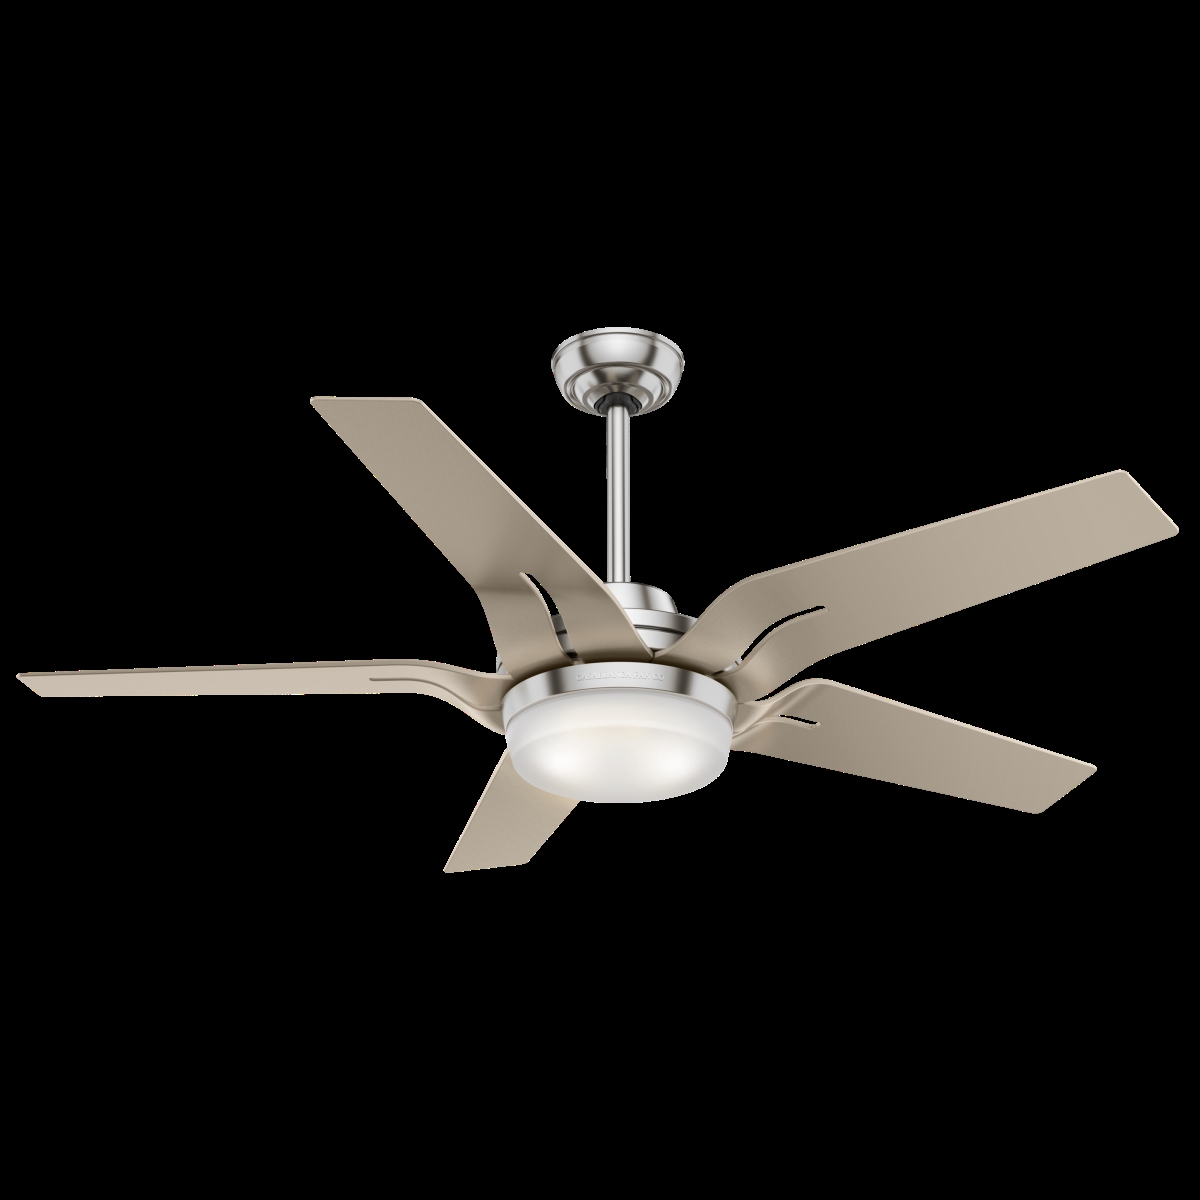 Picture of Casablanca 59197 56 in. Correne Brushed Nickel Ceiling Fan with LED Light Kit & Handheld Remote